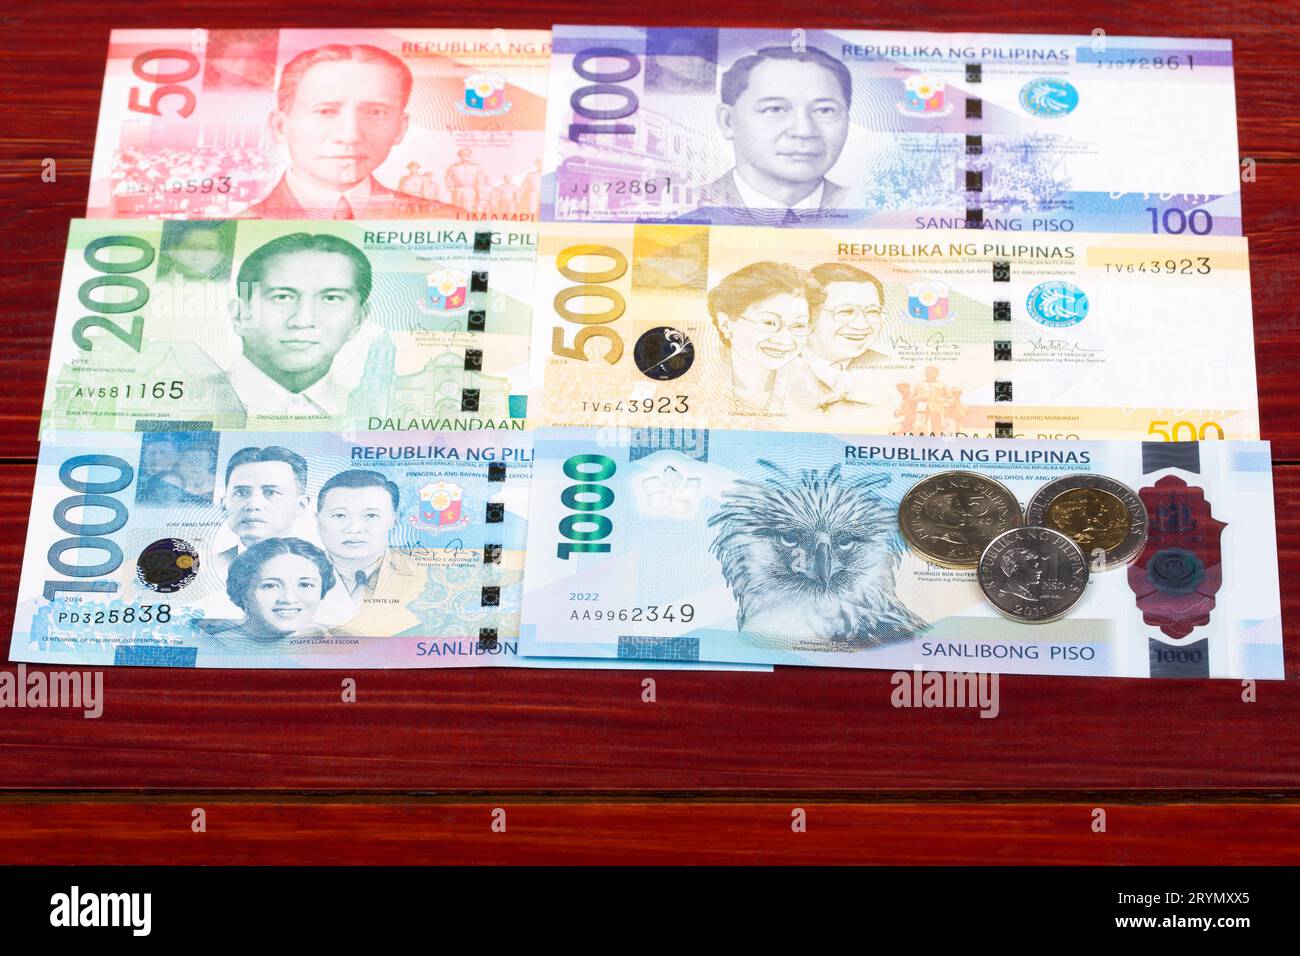 Philippine money - coins and banknotes Stock Photo